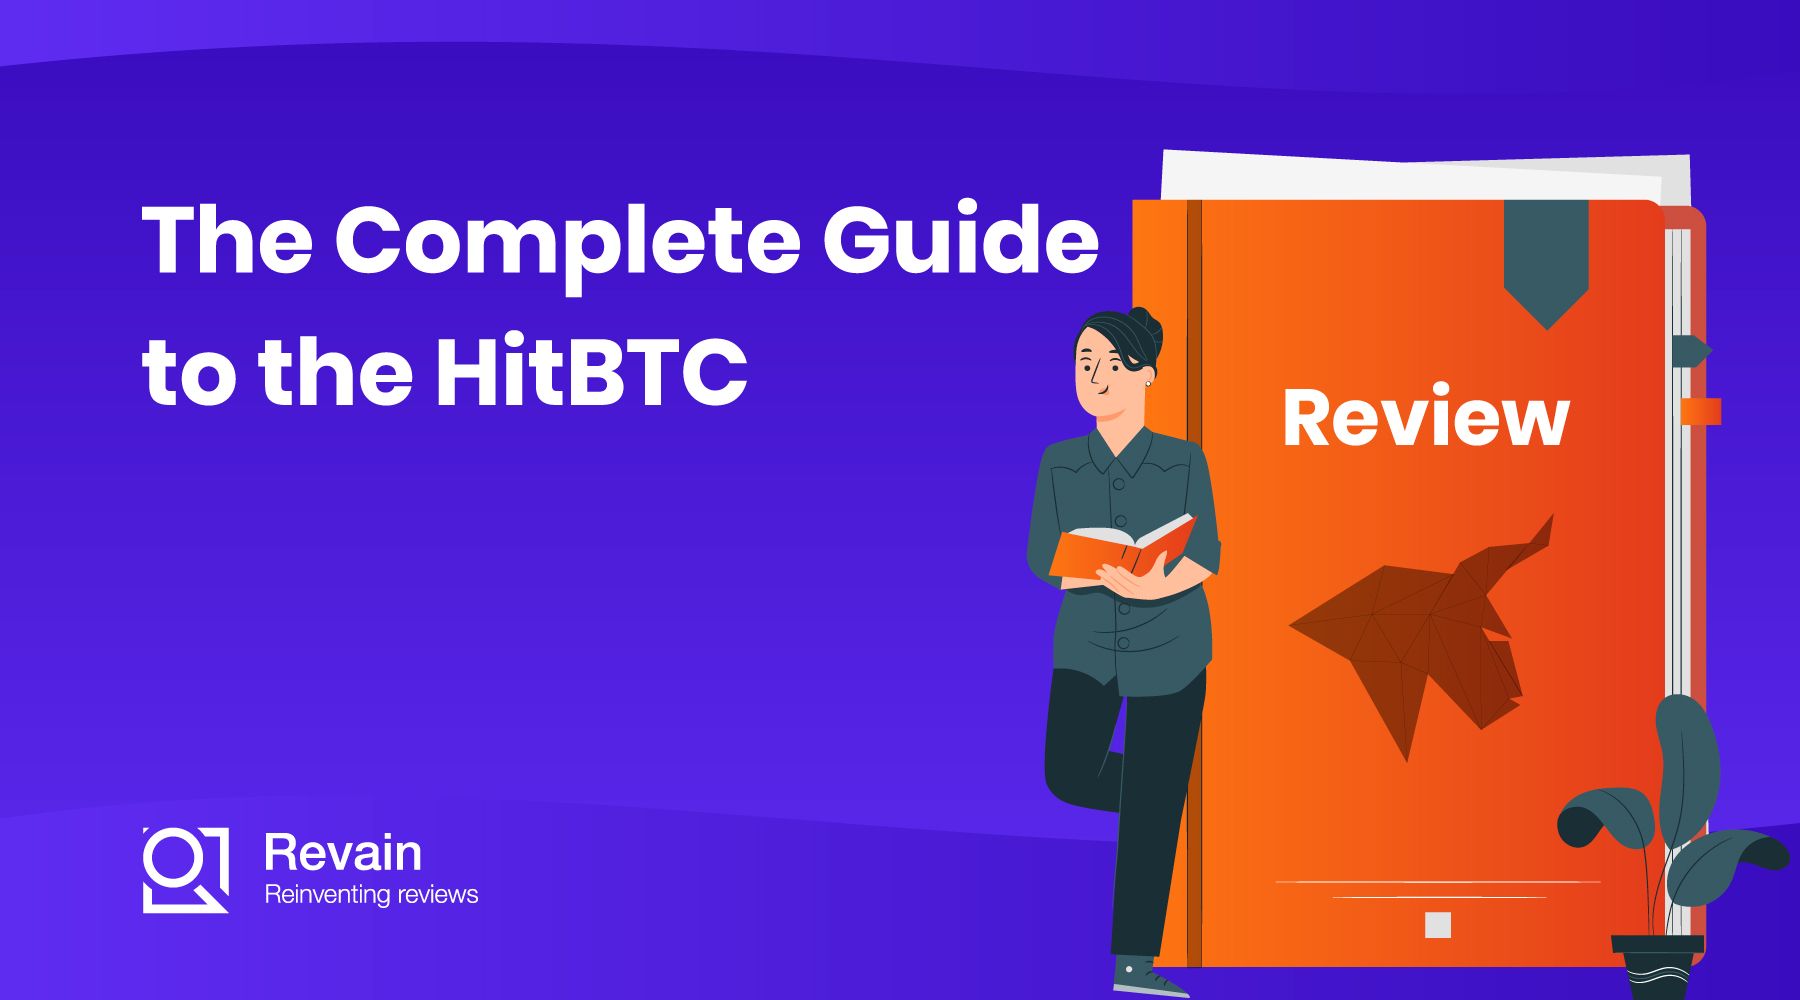 The Complete Guide to the HitBTC Exchange